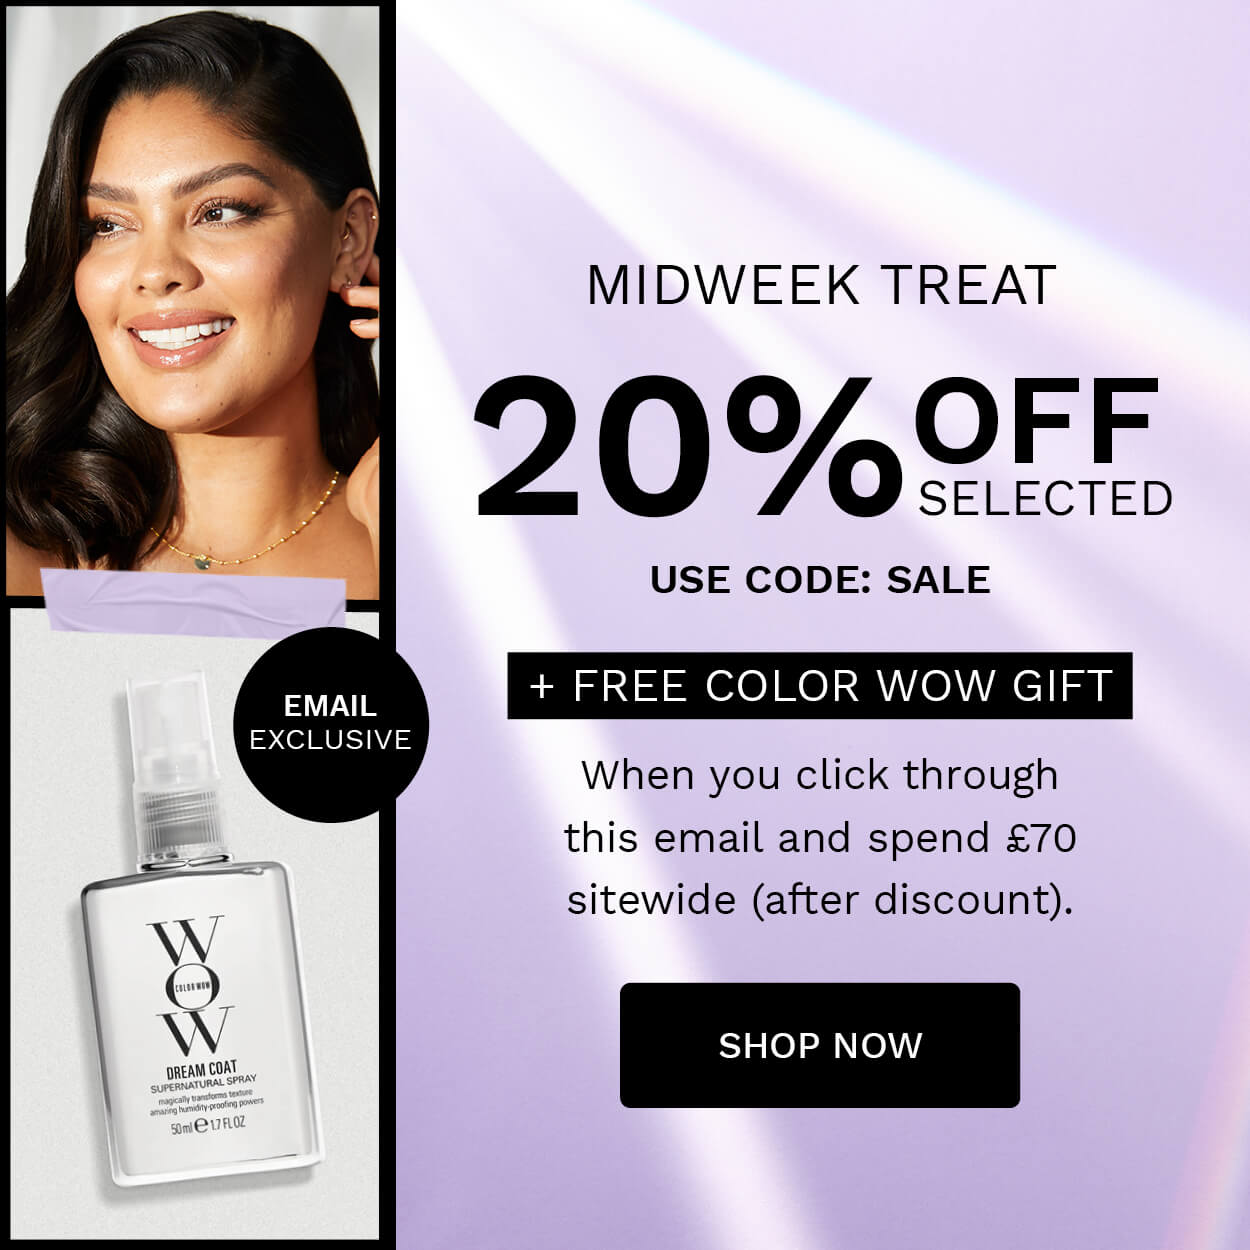 MIDWEEK TREAT 20%FE, USE CODE: SALE ST FREE COLOR WOW GIFT EXCLUSIVE When you click through this email and spend 70 sitewide after discount. SHOP NOW 